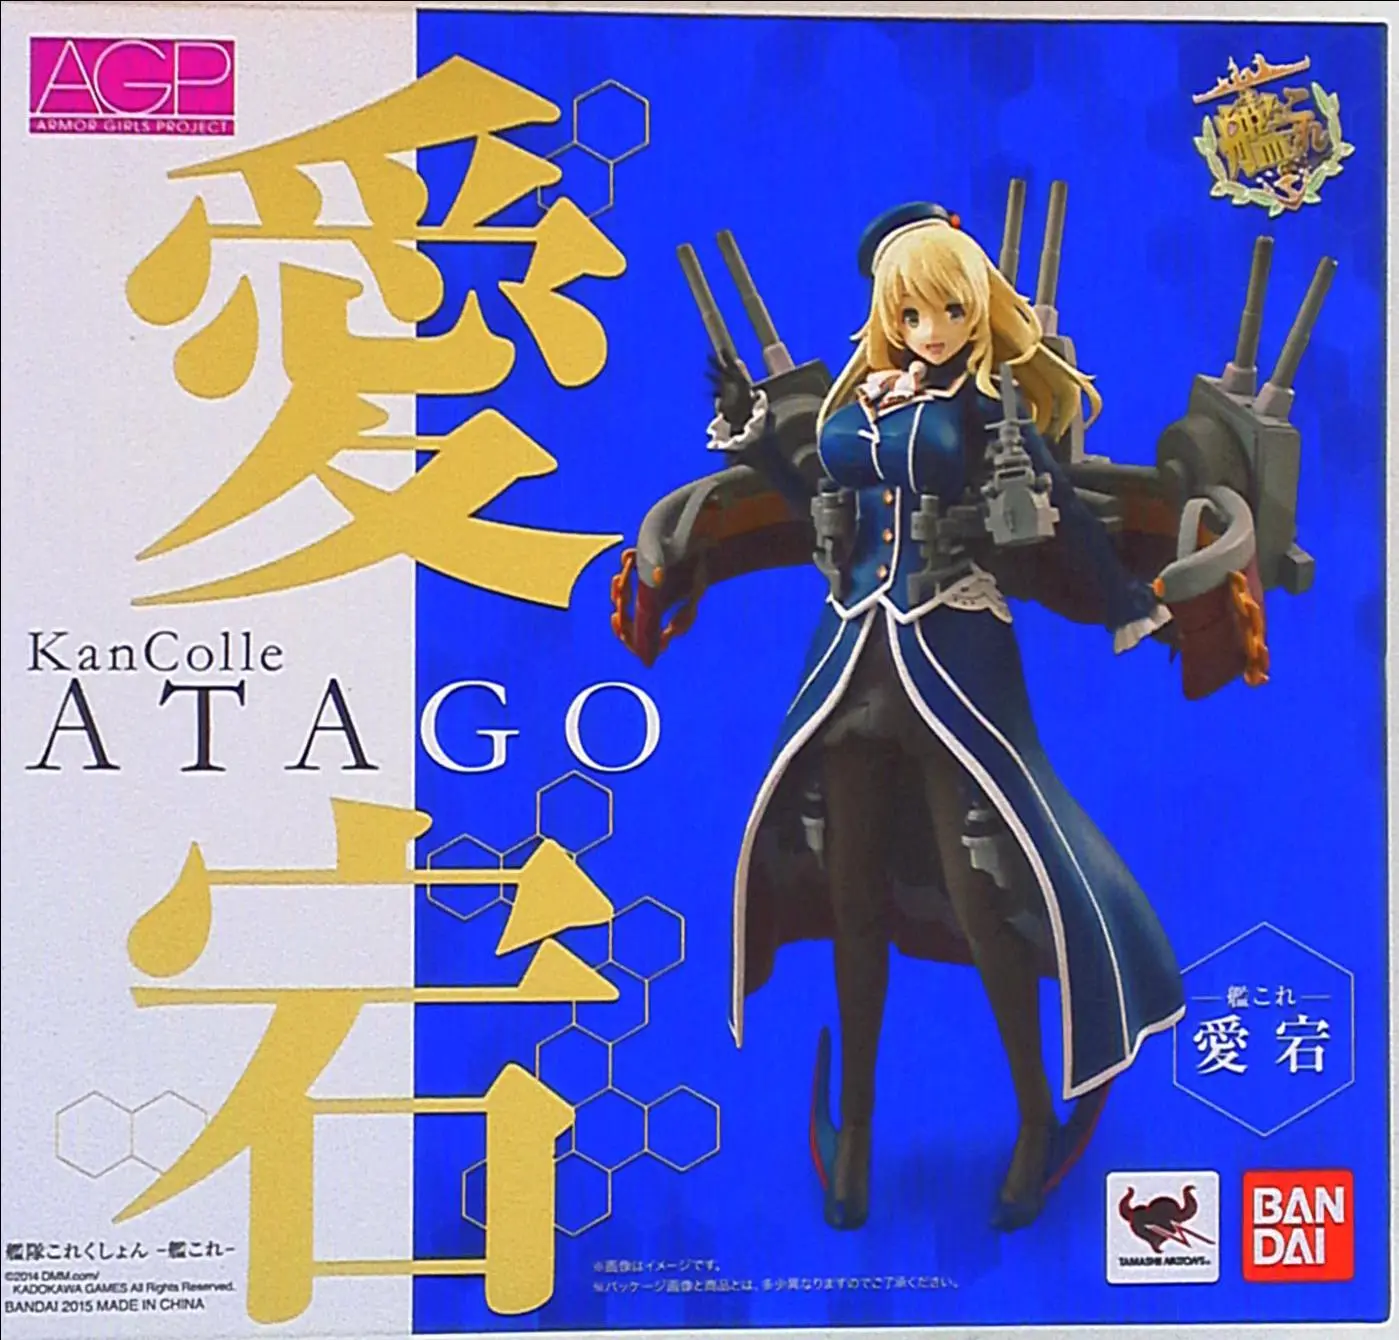 Armor Girls Project - KanColle / Atago